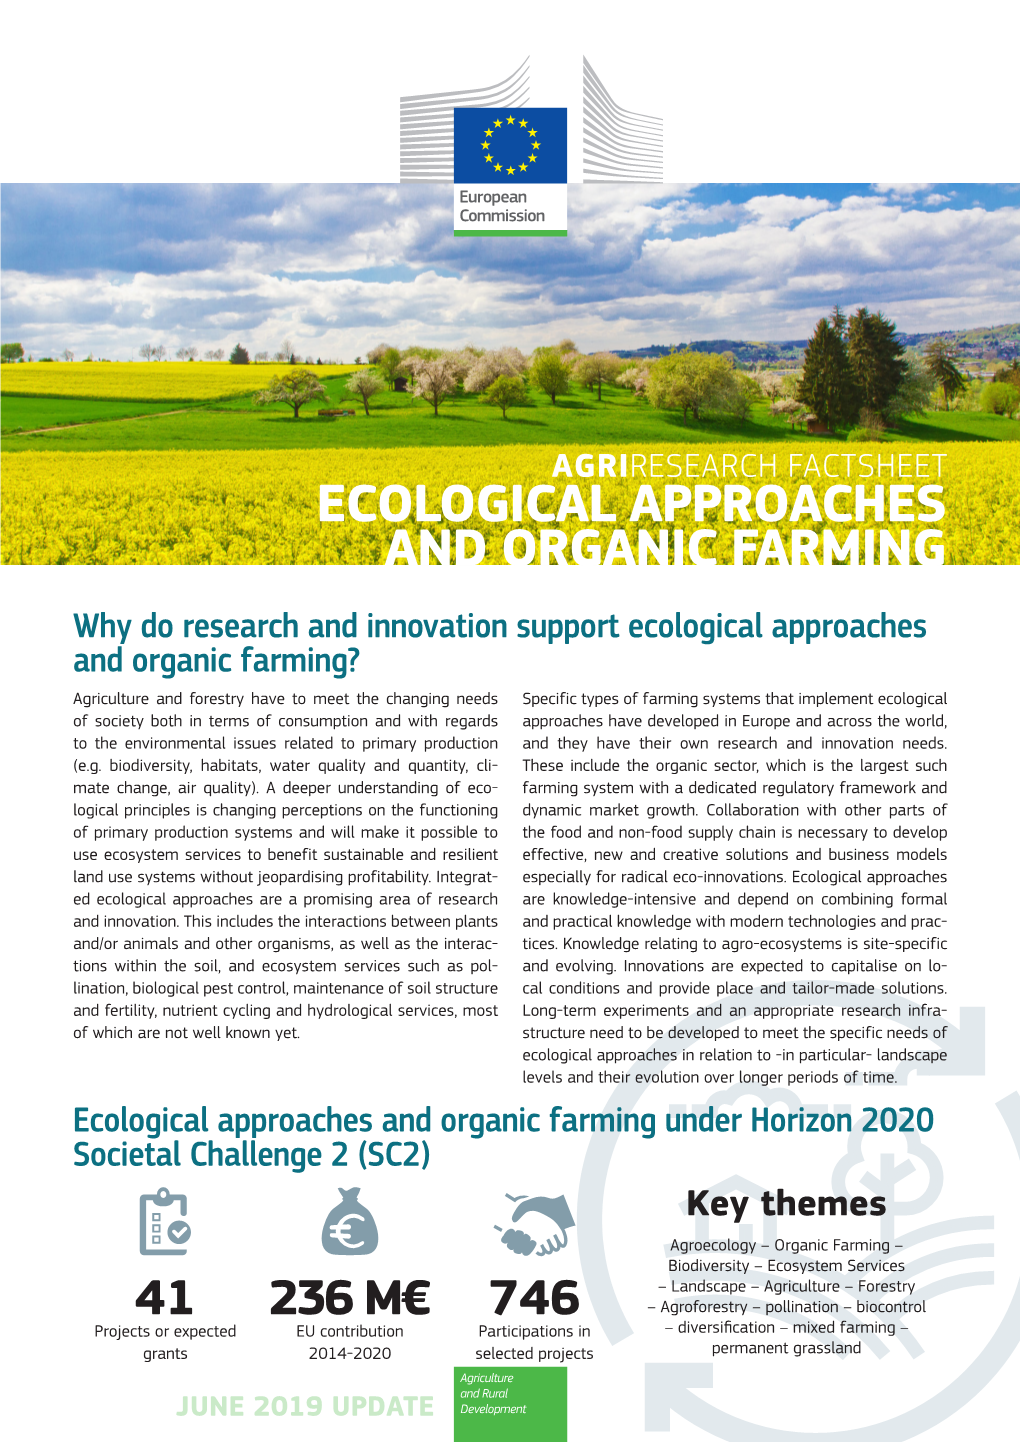 Factsheet on Ecological Approaches and Organic Farming